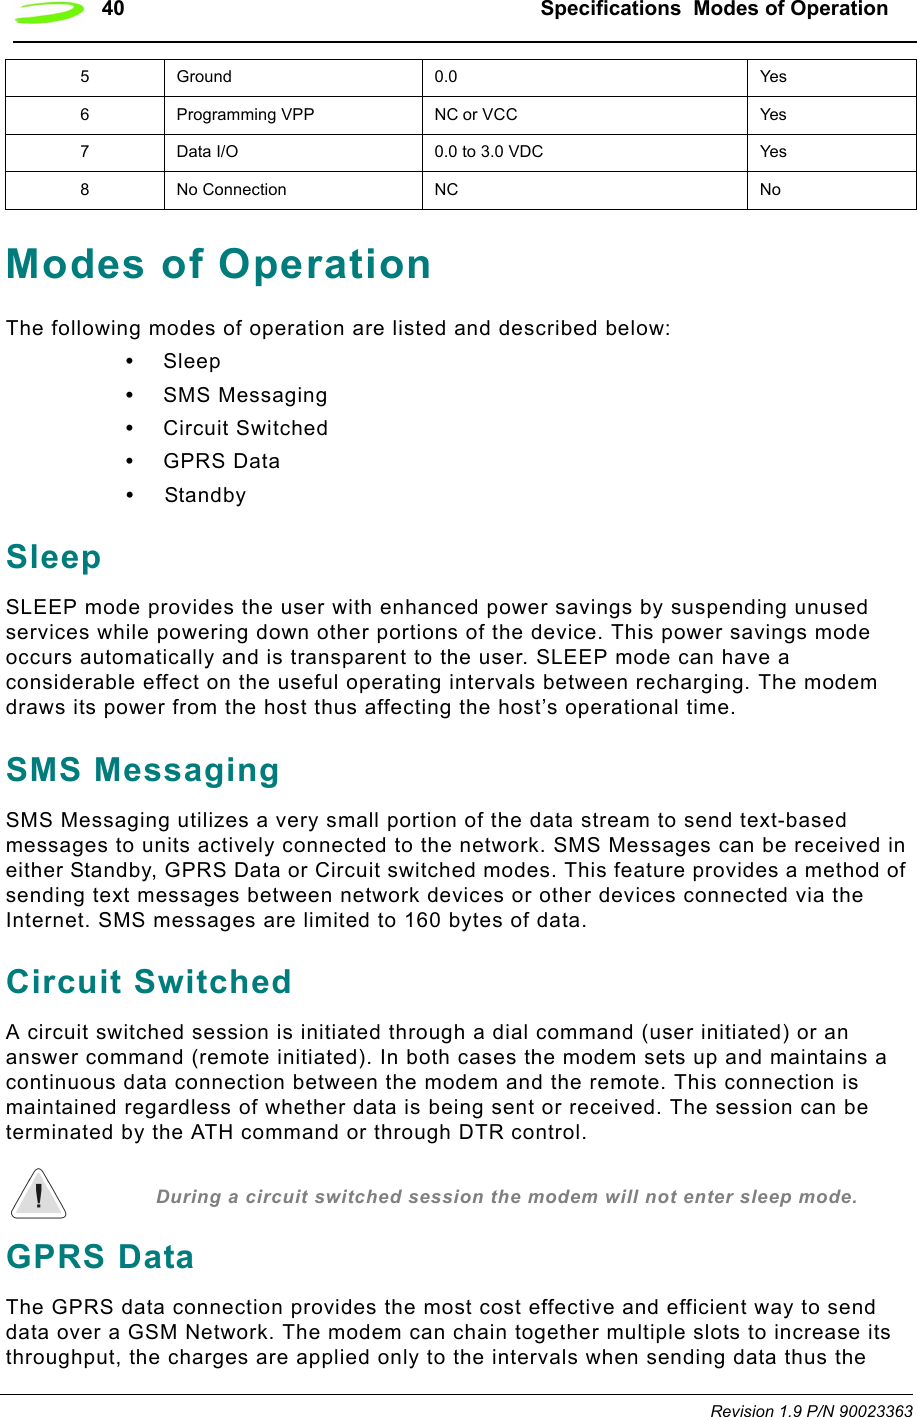 40 Specifications  Modes of OperationRevision 1.9 P/N 90023363Modes of OperationThe following modes of operation are listed and described below:•Sleep•SMS Messaging•Circuit Switched•GPRS Data•StandbySleepSLEEP mode provides the user with enhanced power savings by suspending unused services while powering down other portions of the device. This power savings mode occurs automatically and is transparent to the user. SLEEP mode can have a considerable effect on the useful operating intervals between recharging. The modem draws its power from the host thus affecting the host’s operational time. SMS MessagingSMS Messaging utilizes a very small portion of the data stream to send text-based messages to units actively connected to the network. SMS Messages can be received in either Standby, GPRS Data or Circuit switched modes. This feature provides a method of sending text messages between network devices or other devices connected via the Internet. SMS messages are limited to 160 bytes of data.Circuit SwitchedA circuit switched session is initiated through a dial command (user initiated) or an answer command (remote initiated). In both cases the modem sets up and maintains a continuous data connection between the modem and the remote. This connection is maintained regardless of whether data is being sent or received. The session can be terminated by the ATH command or through DTR control. During a circuit switched session the modem will not enter sleep mode. GPRS DataThe GPRS data connection provides the most cost effective and efficient way to send data over a GSM Network. The modem can chain together multiple slots to increase its throughput, the charges are applied only to the intervals when sending data thus the 5 Ground 0.0 Yes6 Programming VPP NC or VCC Yes7 Data I/O 0.0 to 3.0 VDC Yes8 No Connection NC No